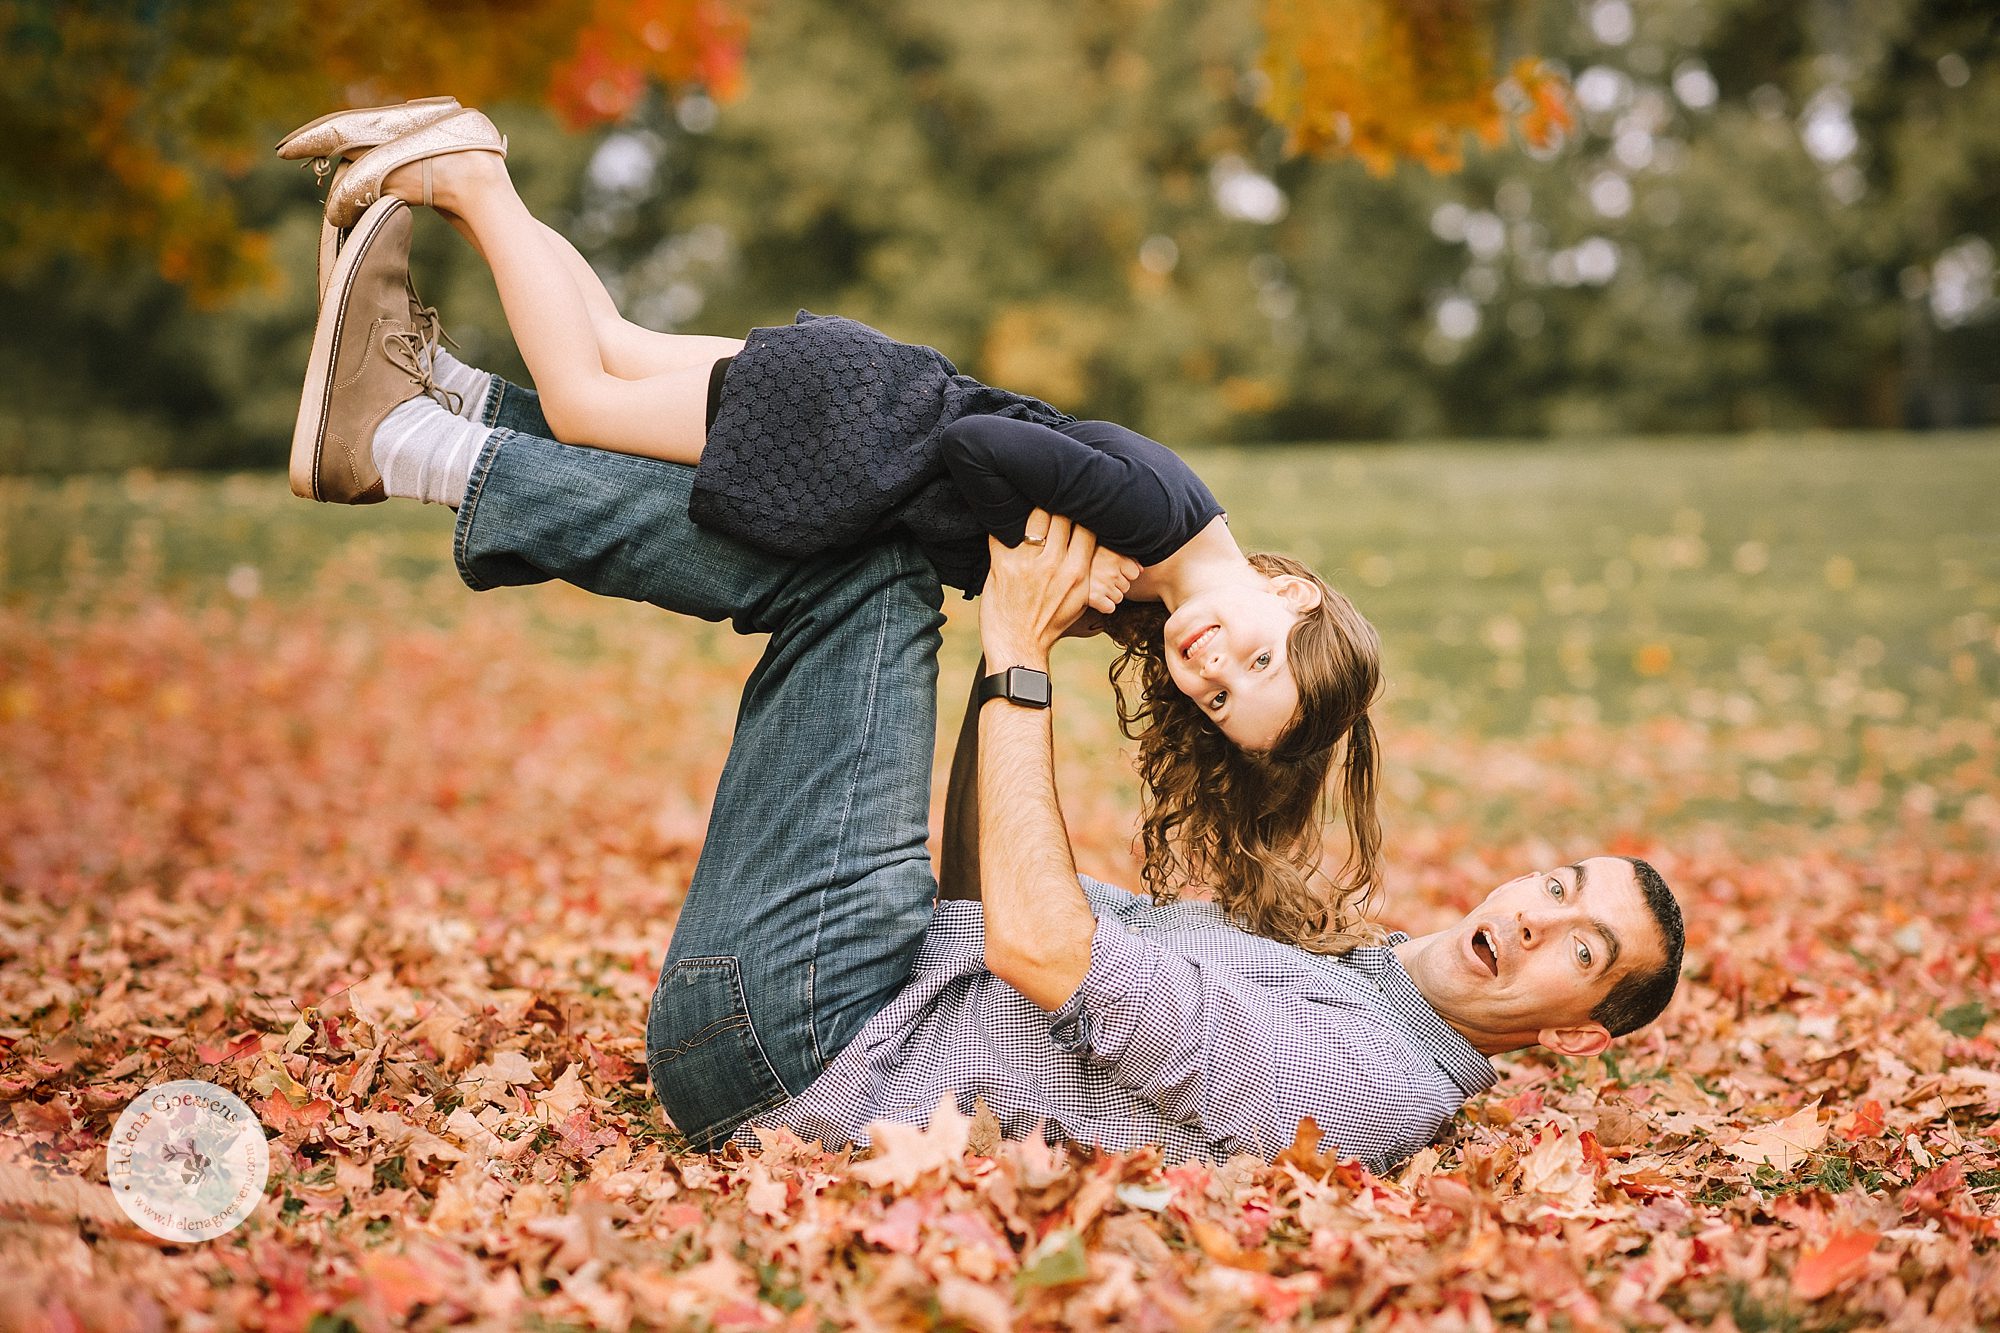 Helena Goessens Photography captures fall family portraits at Larz Anderson Park